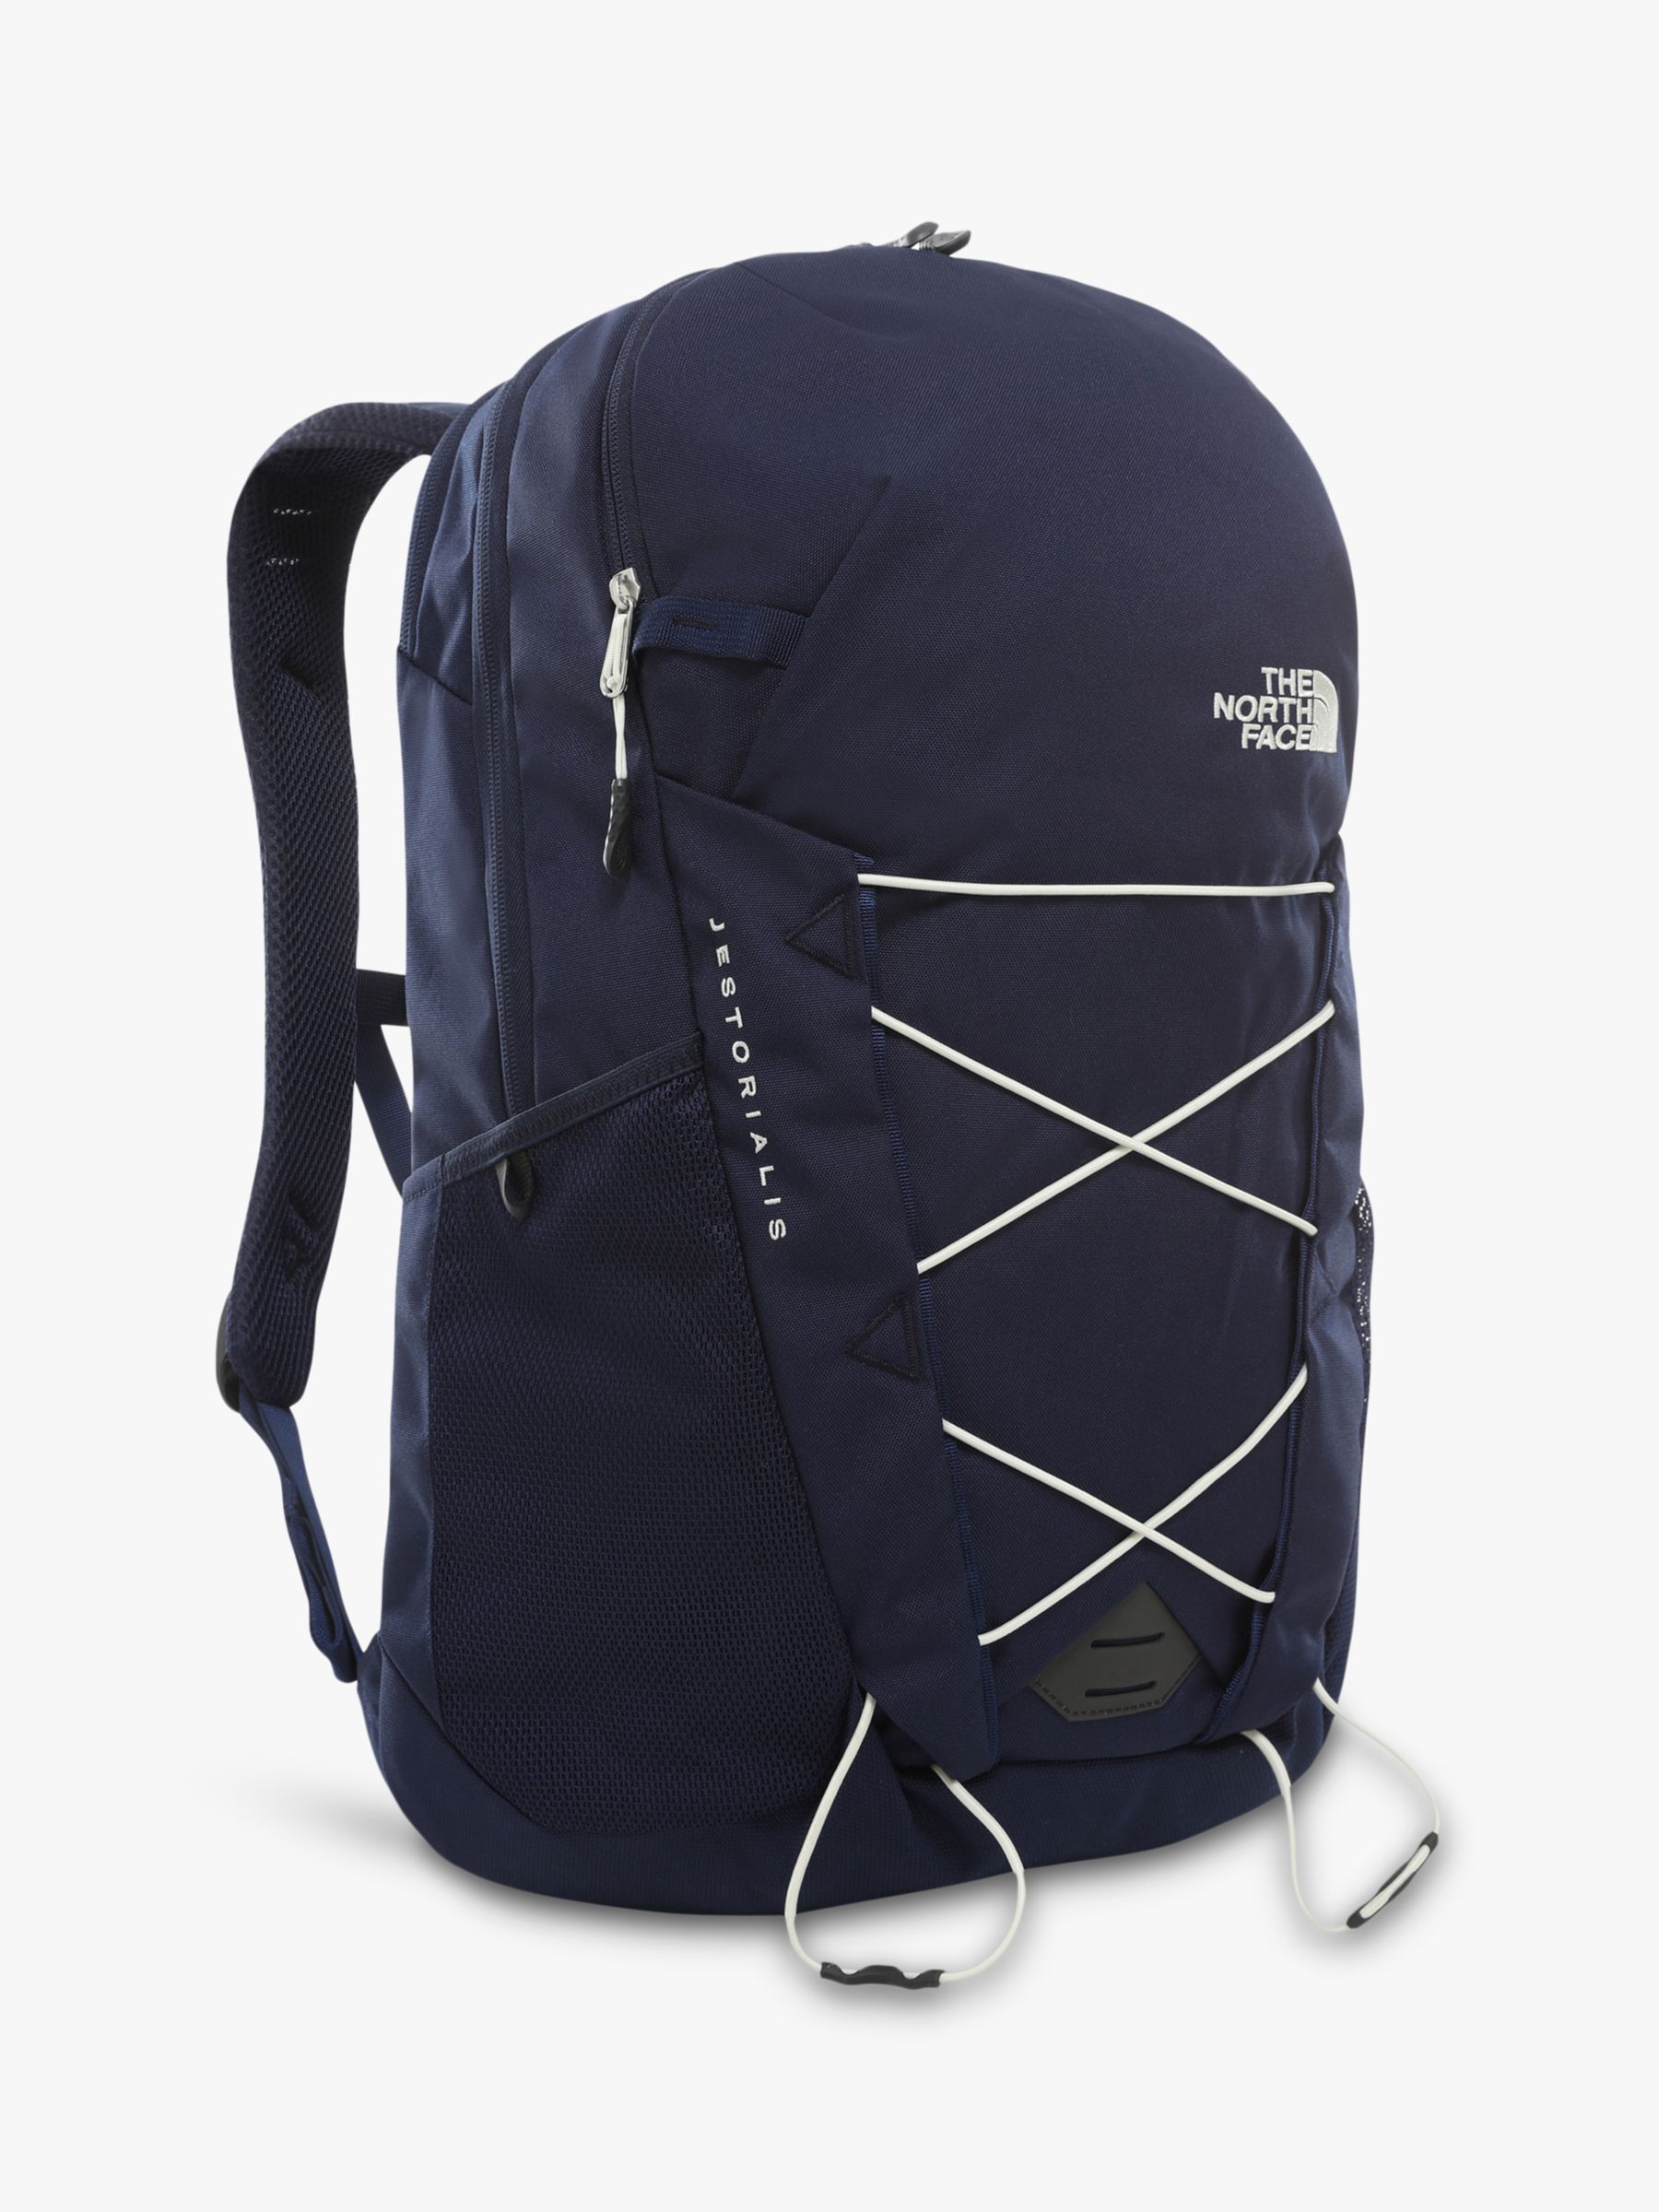 north face backpack white and blue